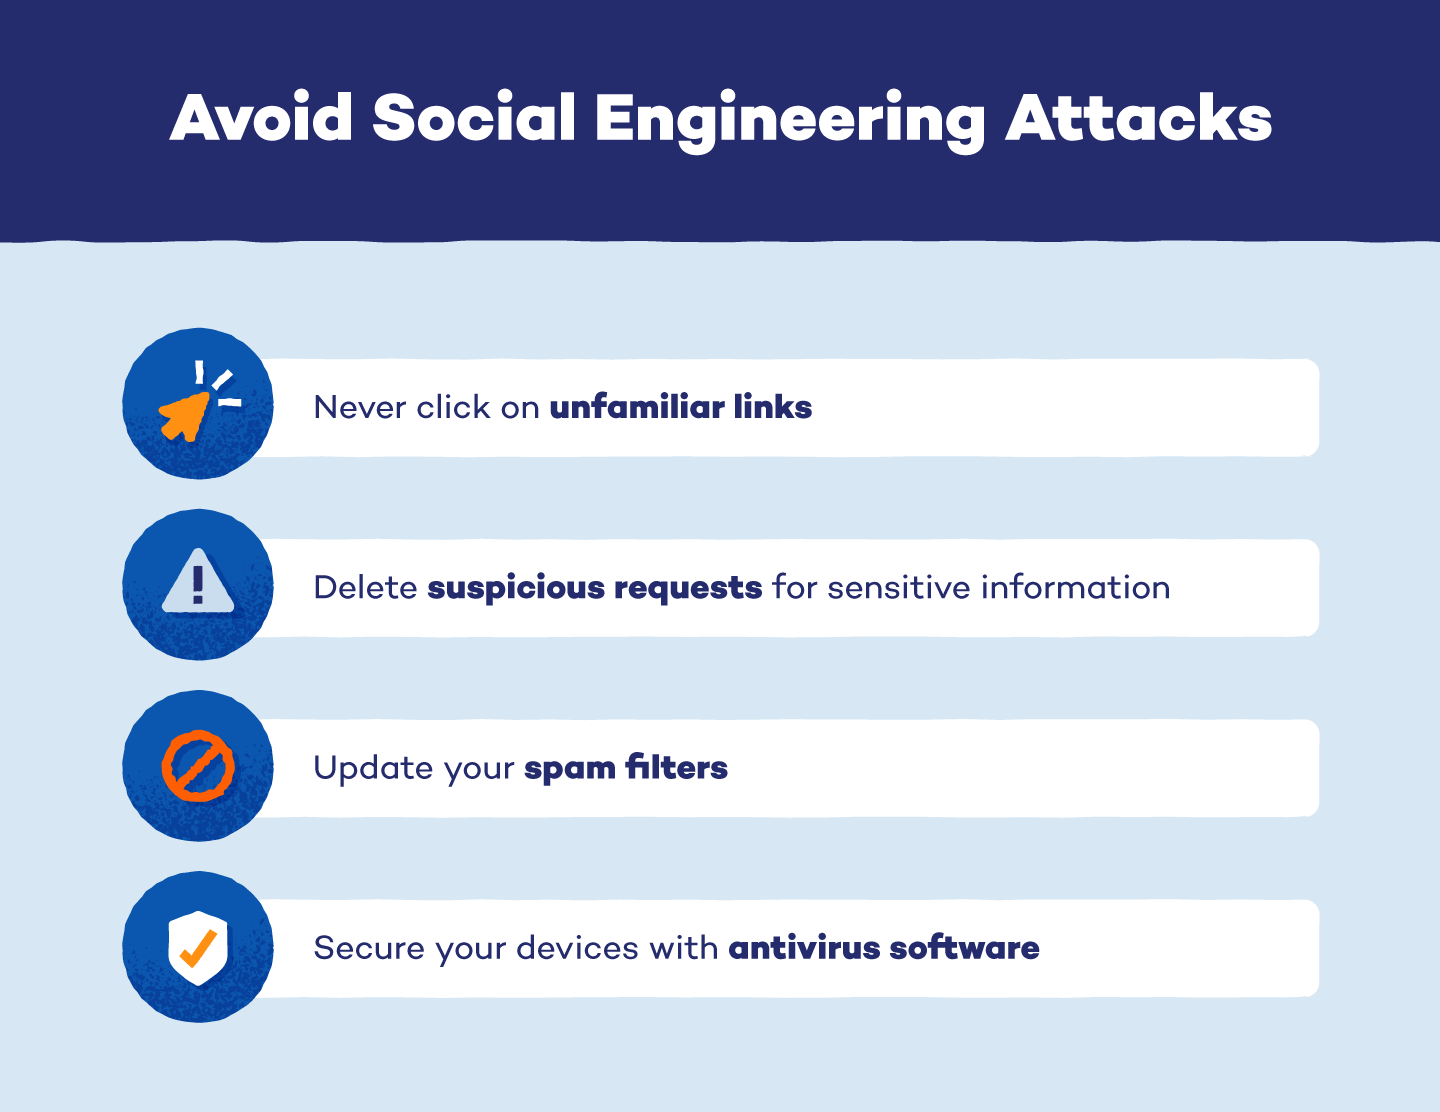 Social Engineering Attacks: How to Stay Protected